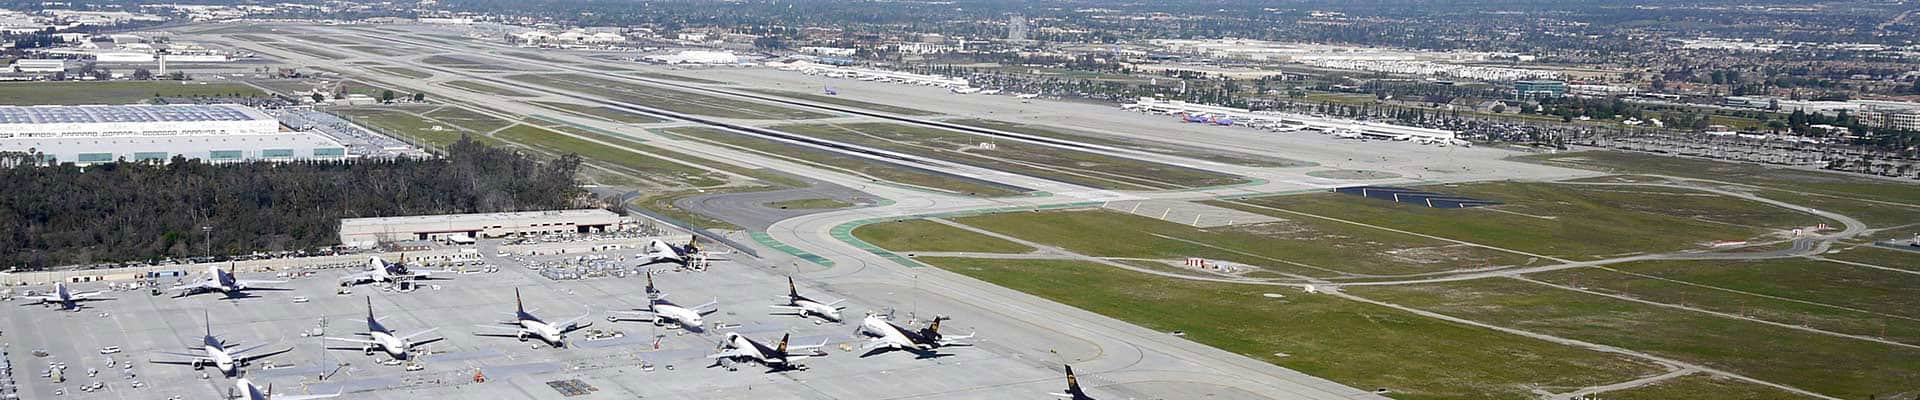 Overhead view of airport with planes on runways